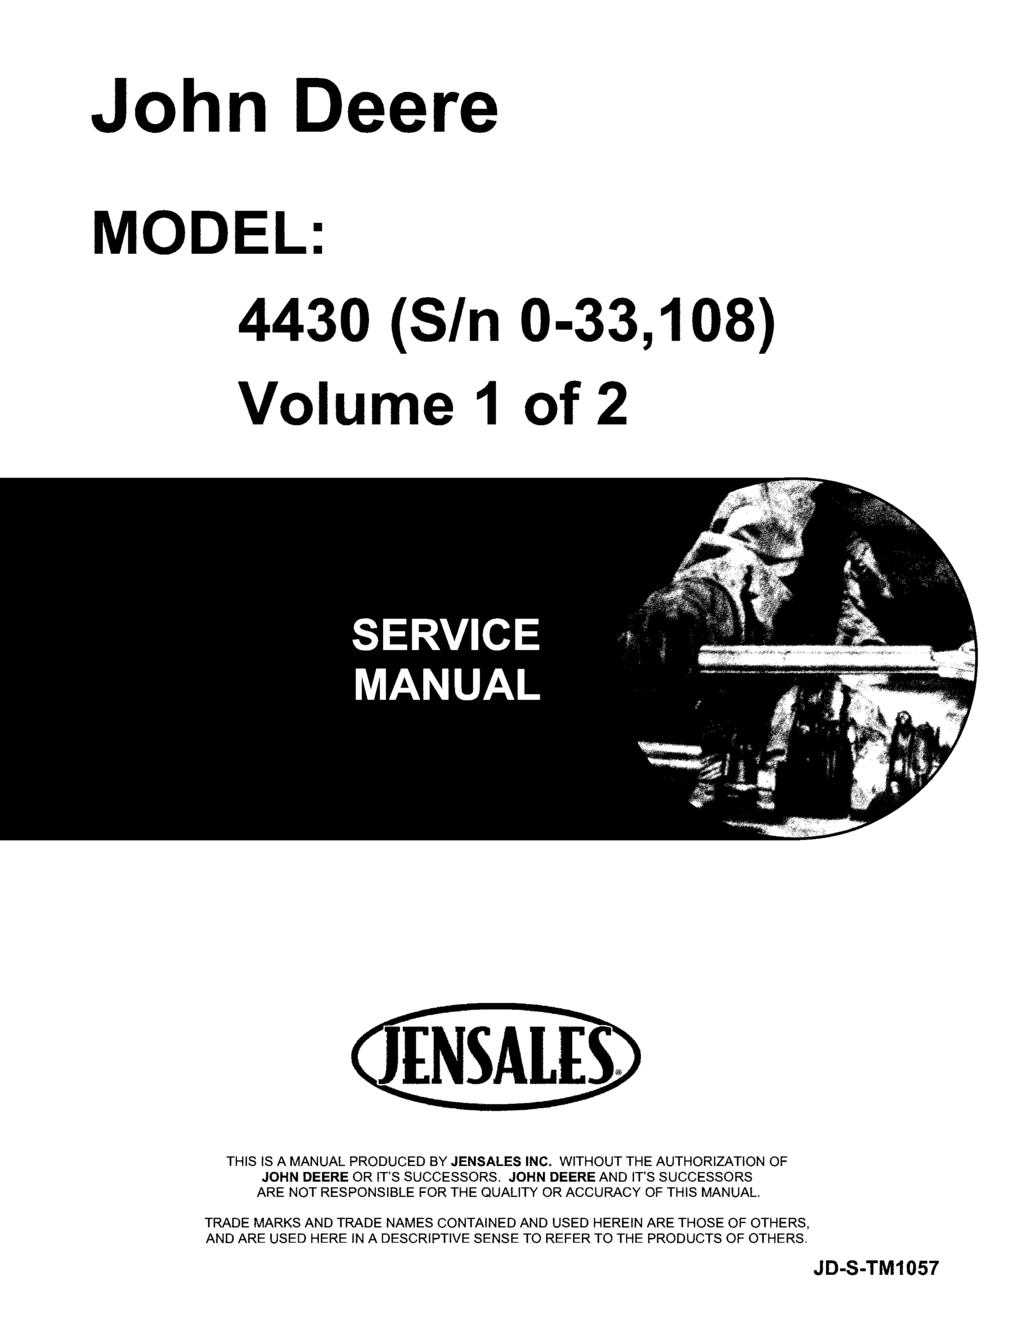 John Deere MODEL: 4430 (SIn 0-33,108) Volume 1 of 2 THIS IS A MANUAL PRODUCED BY JENSALES INC. WITHOUT THE AUTHORIZATION OF JOHN DEERE OR IT'S SUCCESSORS.